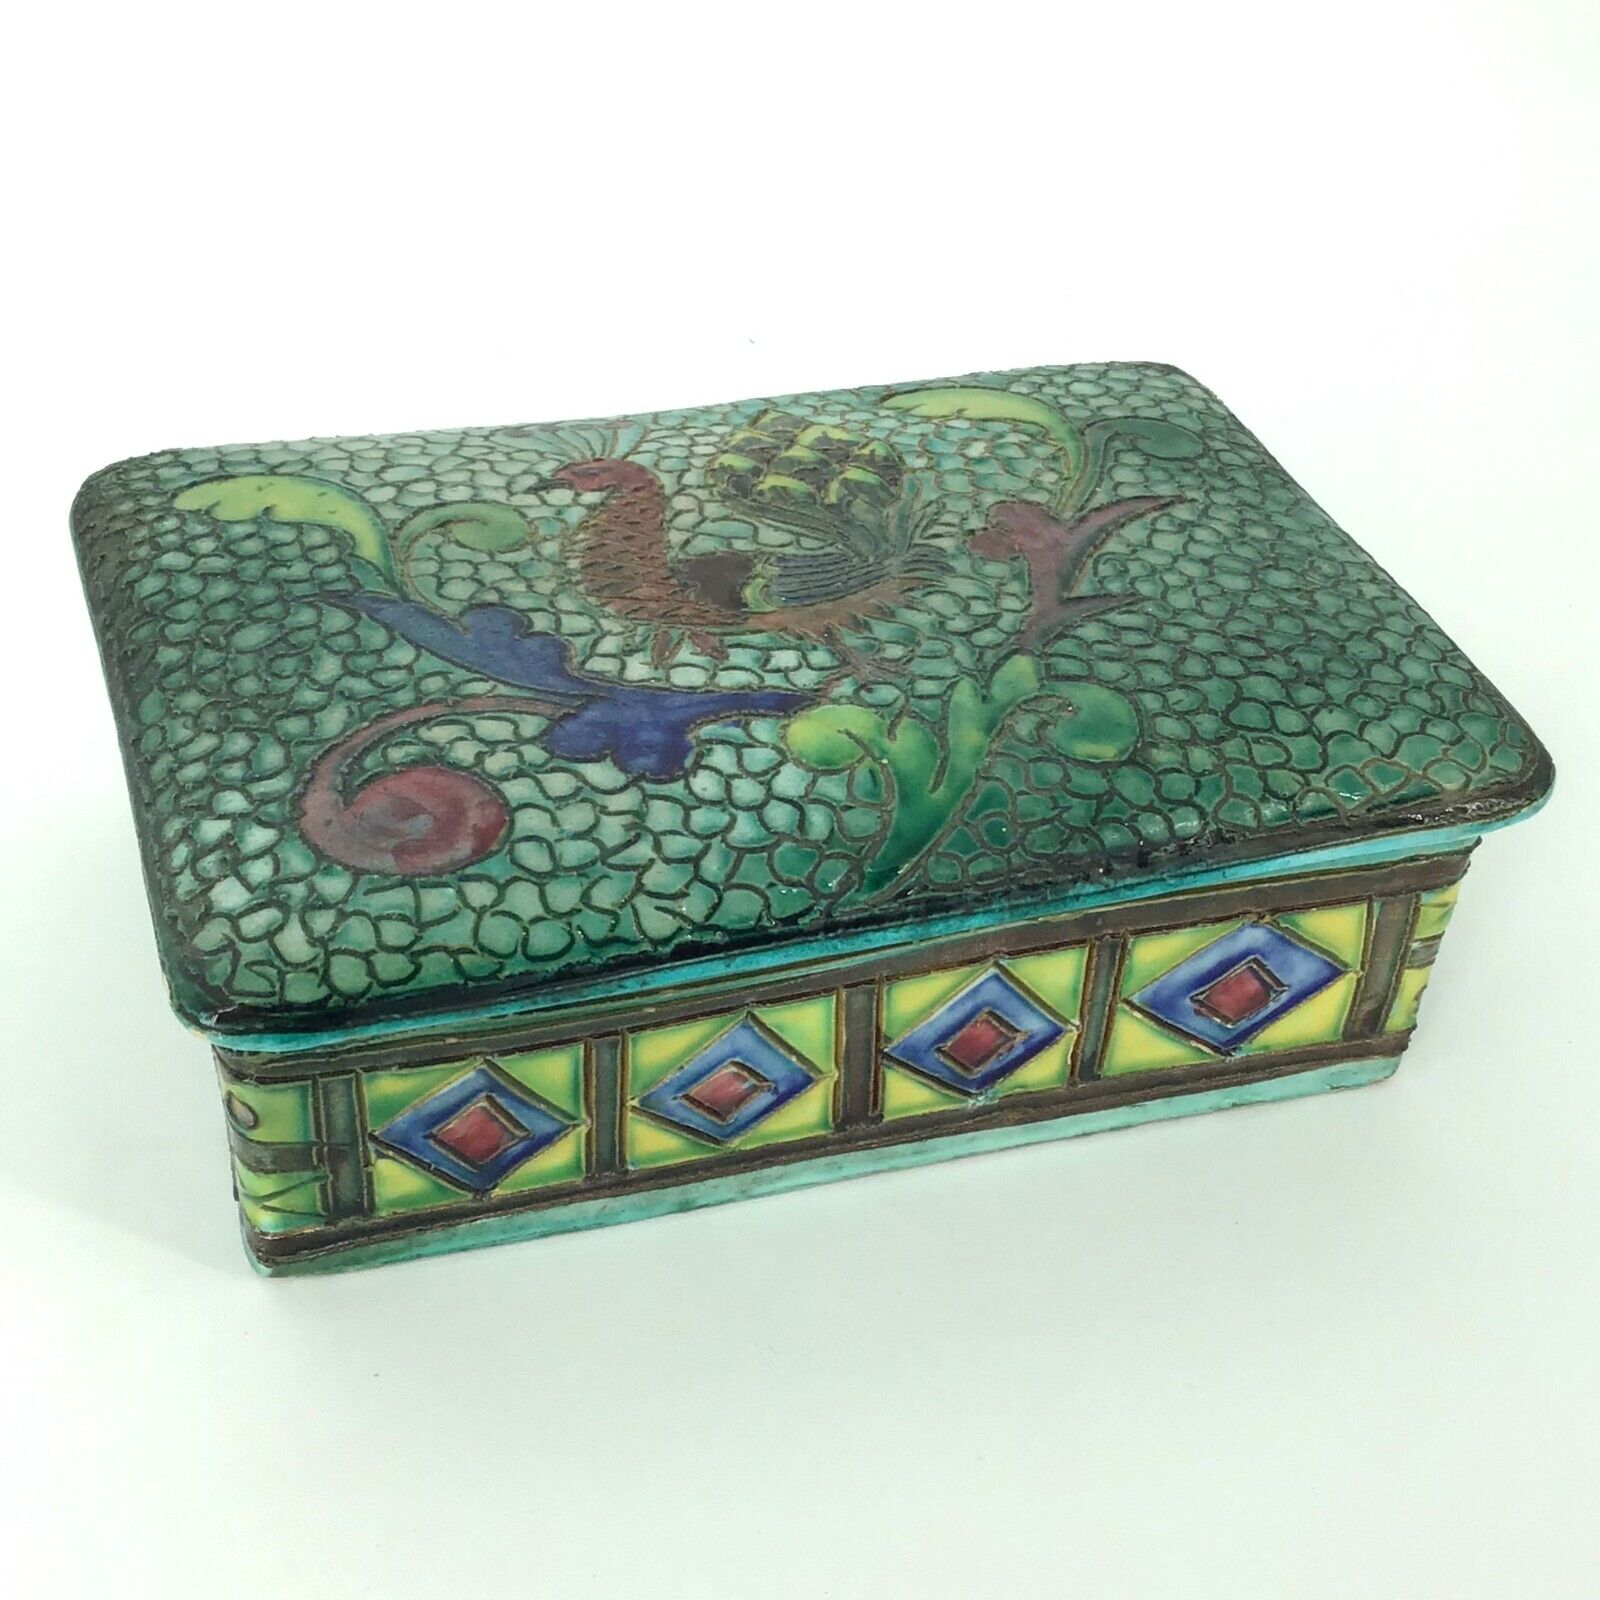 Vintage Peacock Hand Painted Textured Green Ceramic Trinket Box Italy